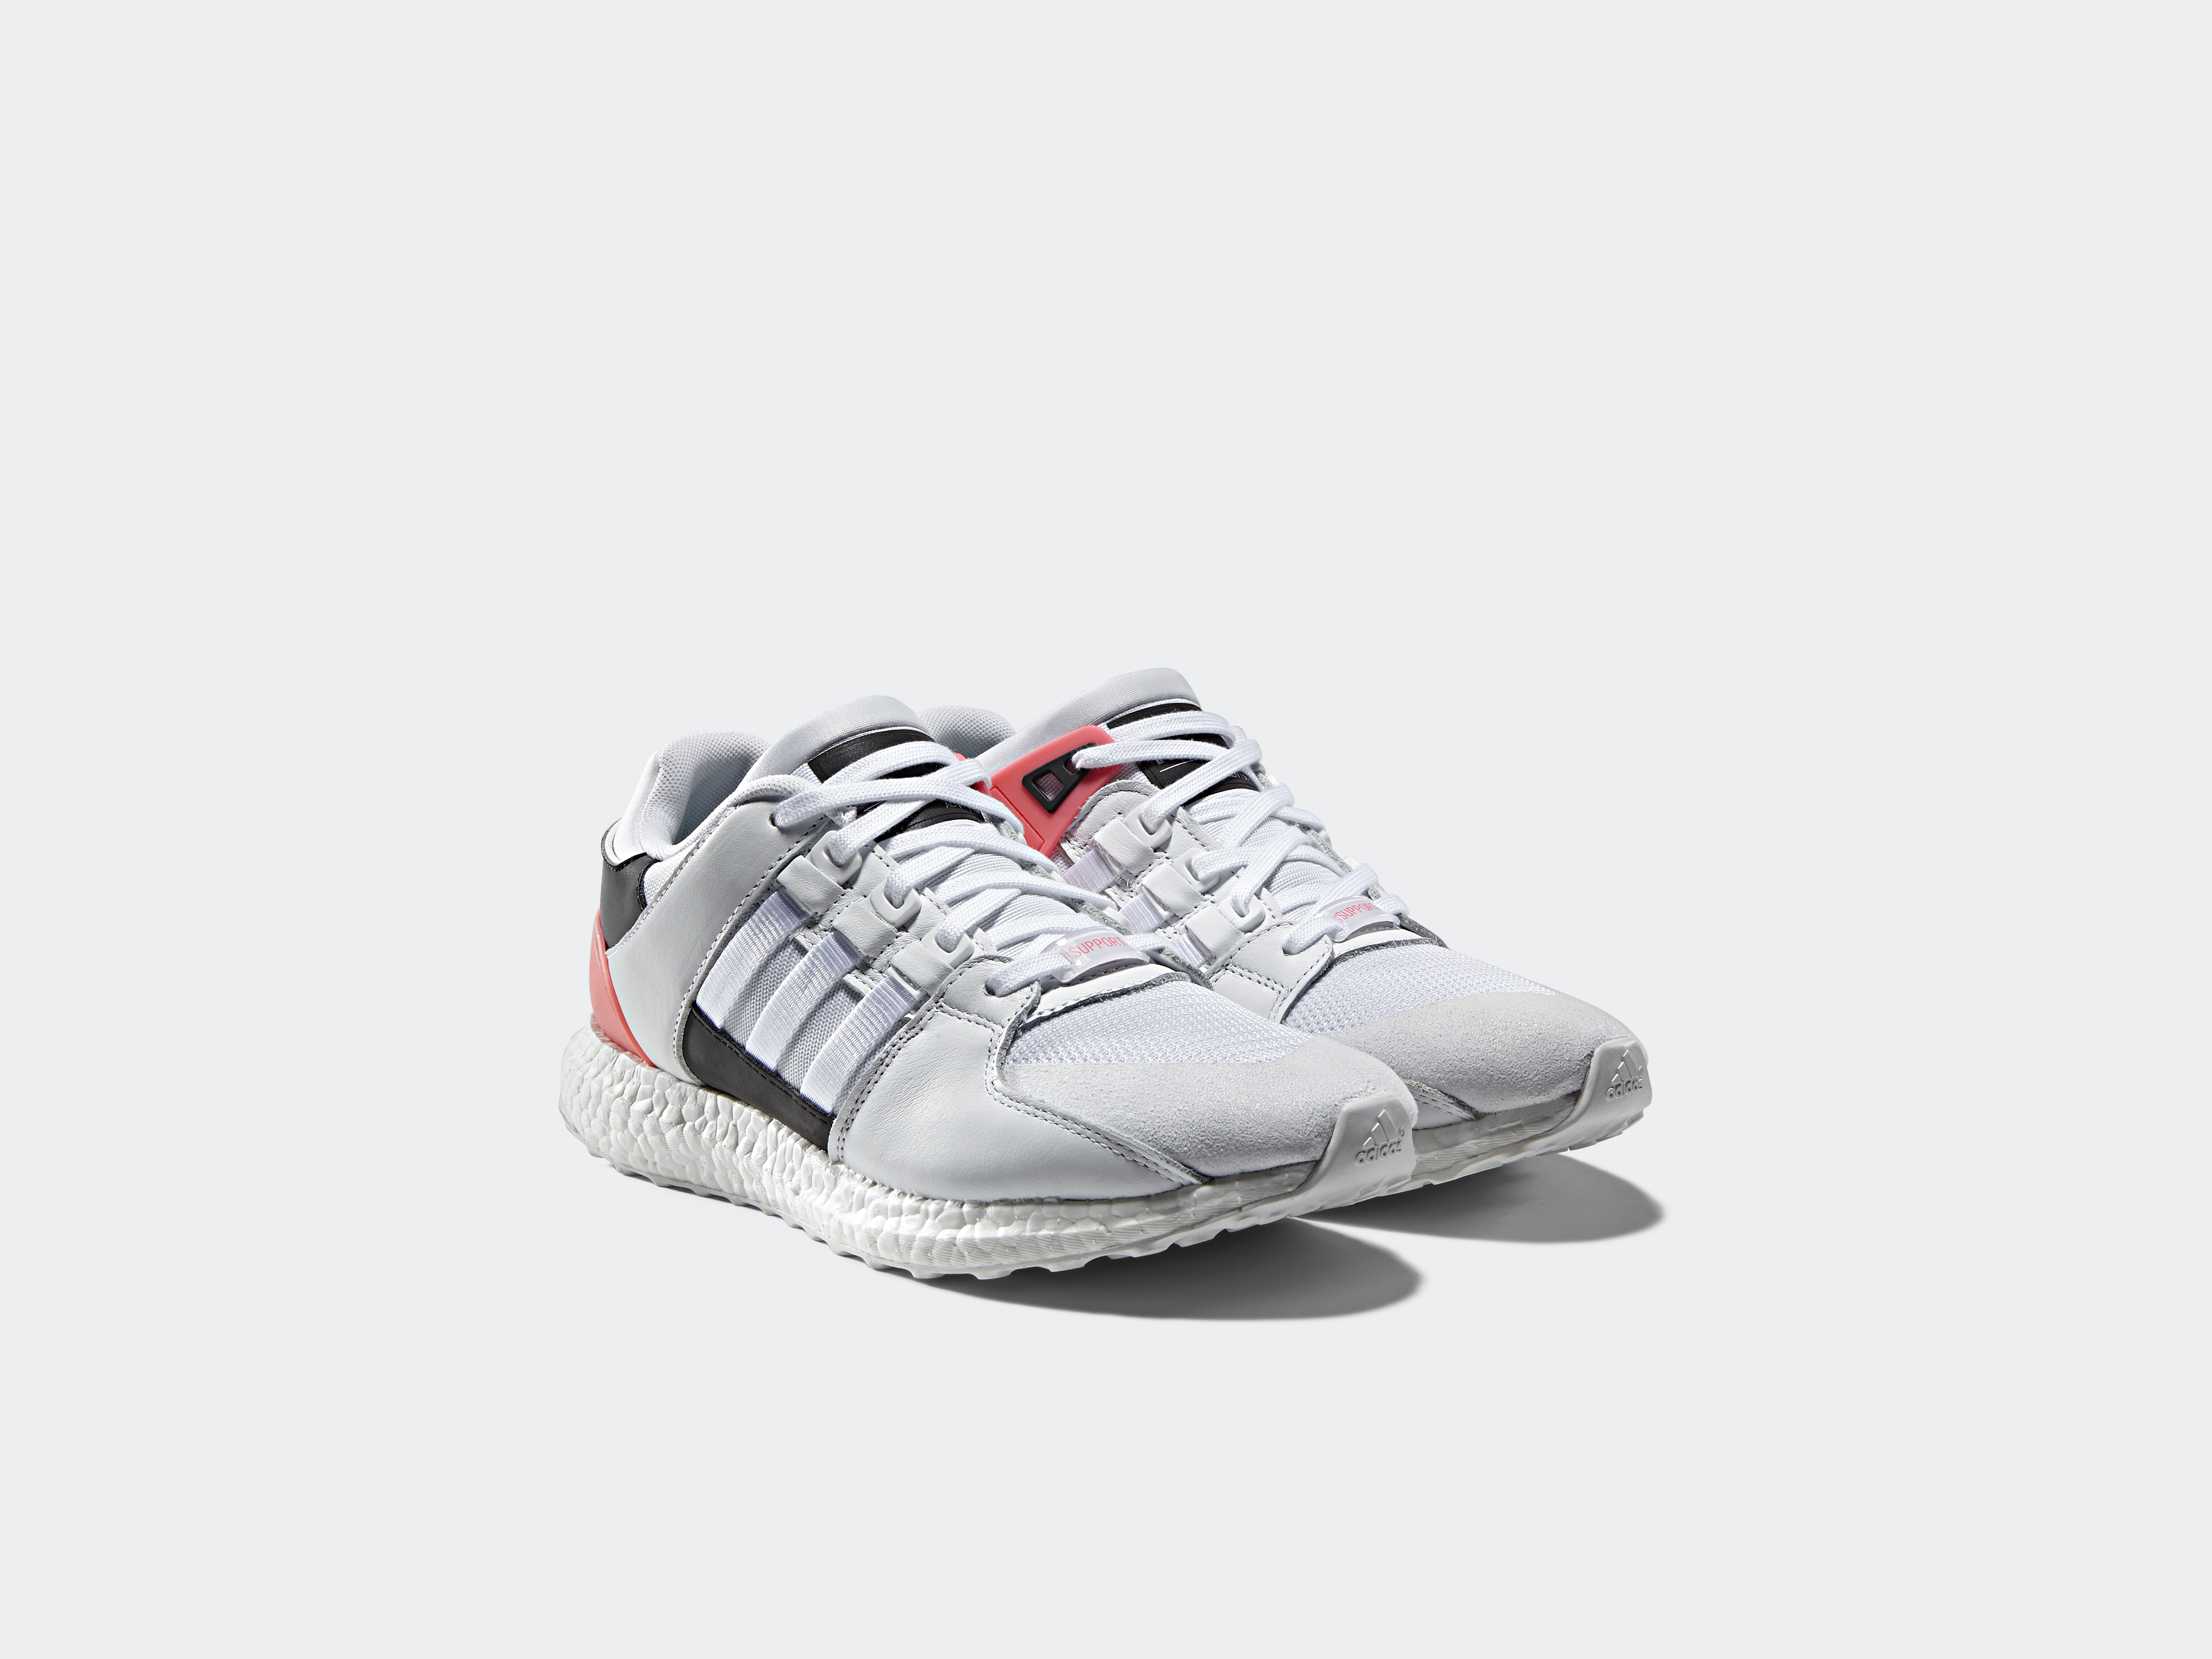 adidas EQT Support Ultra White Turbo Red 2